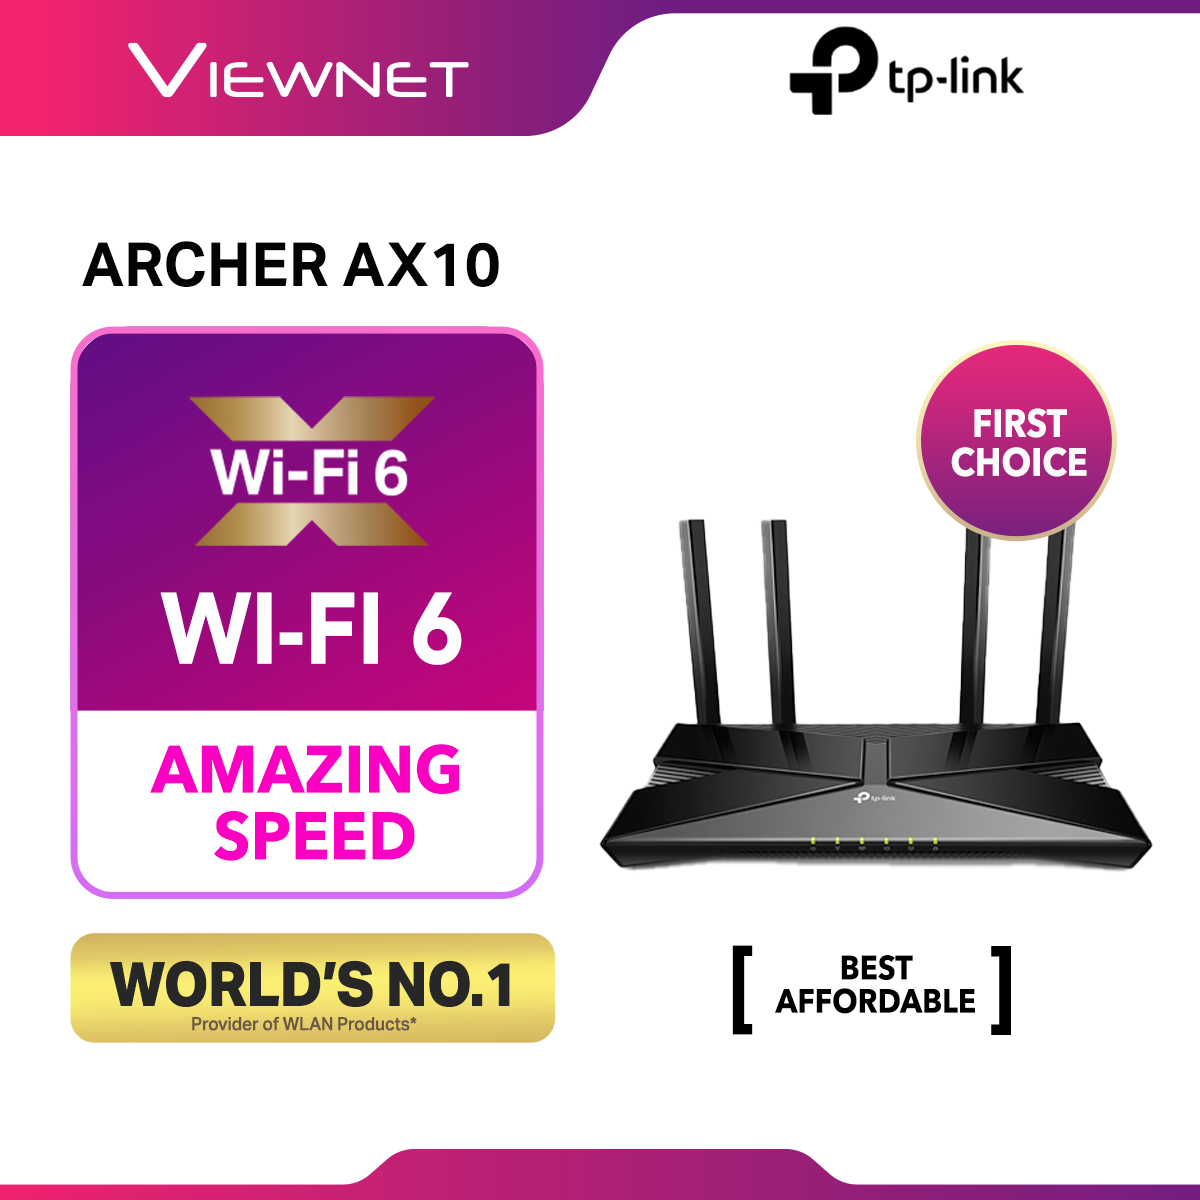 TP-Link Archer AX10 Onemesh - AX1500 Dual Band Wireless AX WiFi 6 Router For UniFi/Maxis/Time Fiber ( Mesh With RE505X )